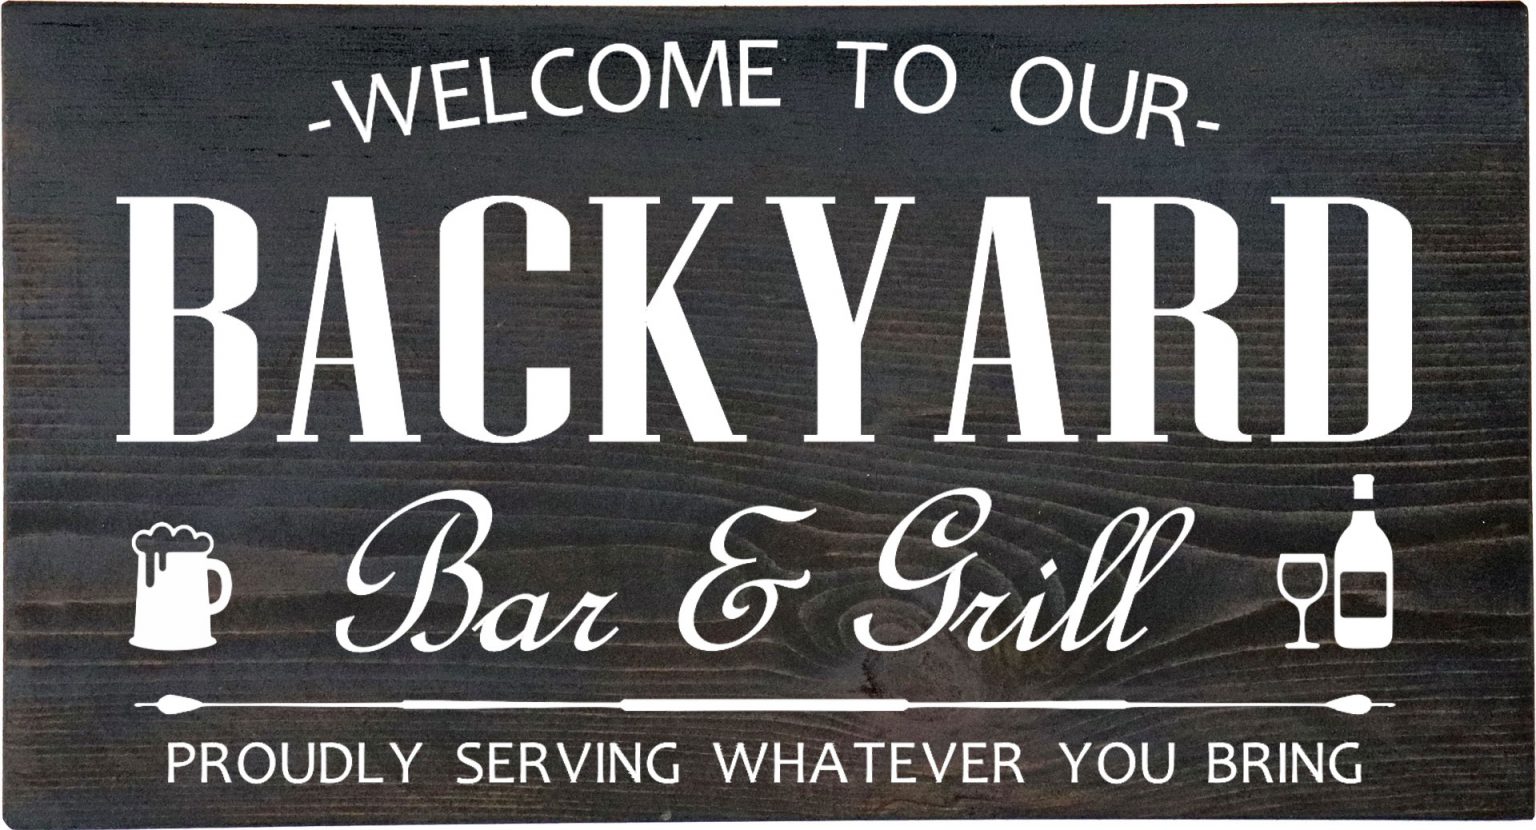 yard bar and grill cardiff hell's kitchen